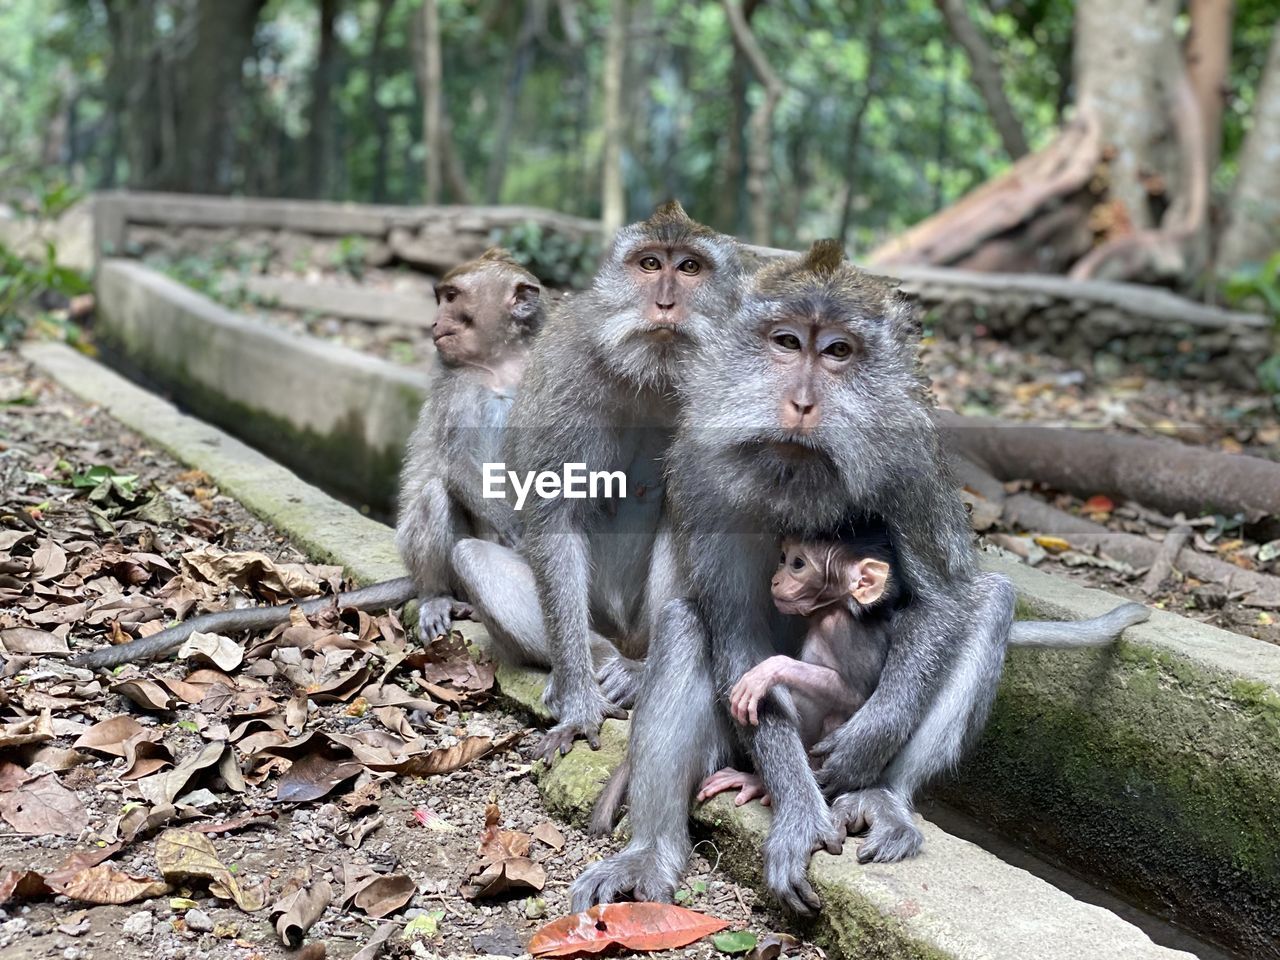 Monkeys looking away at forest